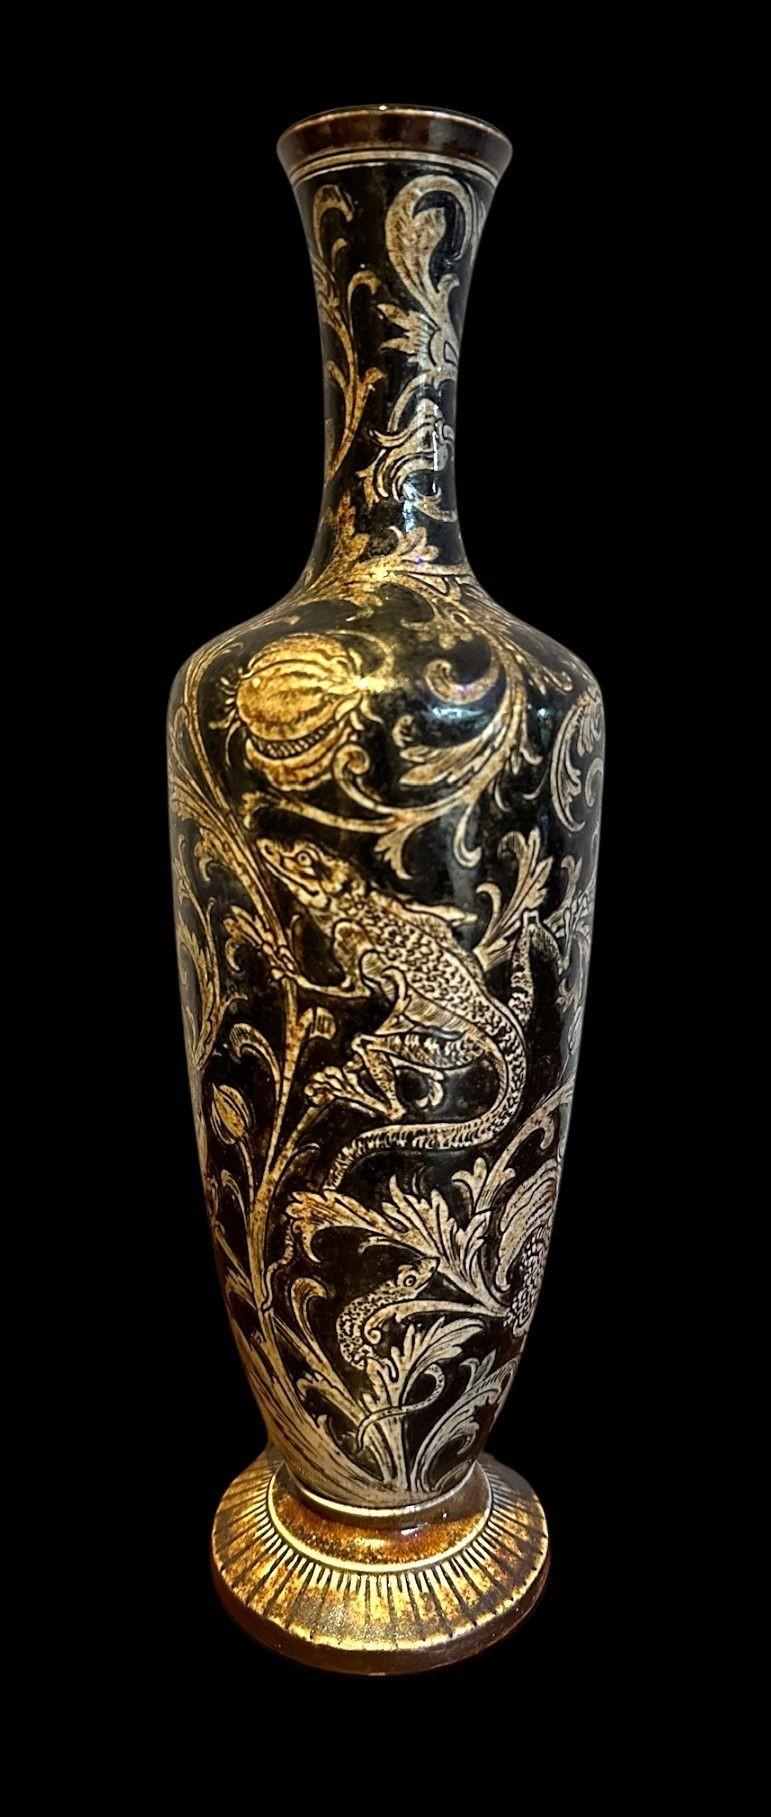 5465
Martin Brothers Vase decorated with Lizards amongst scrolling foliage and seedheads
31cm high
Dated 1893